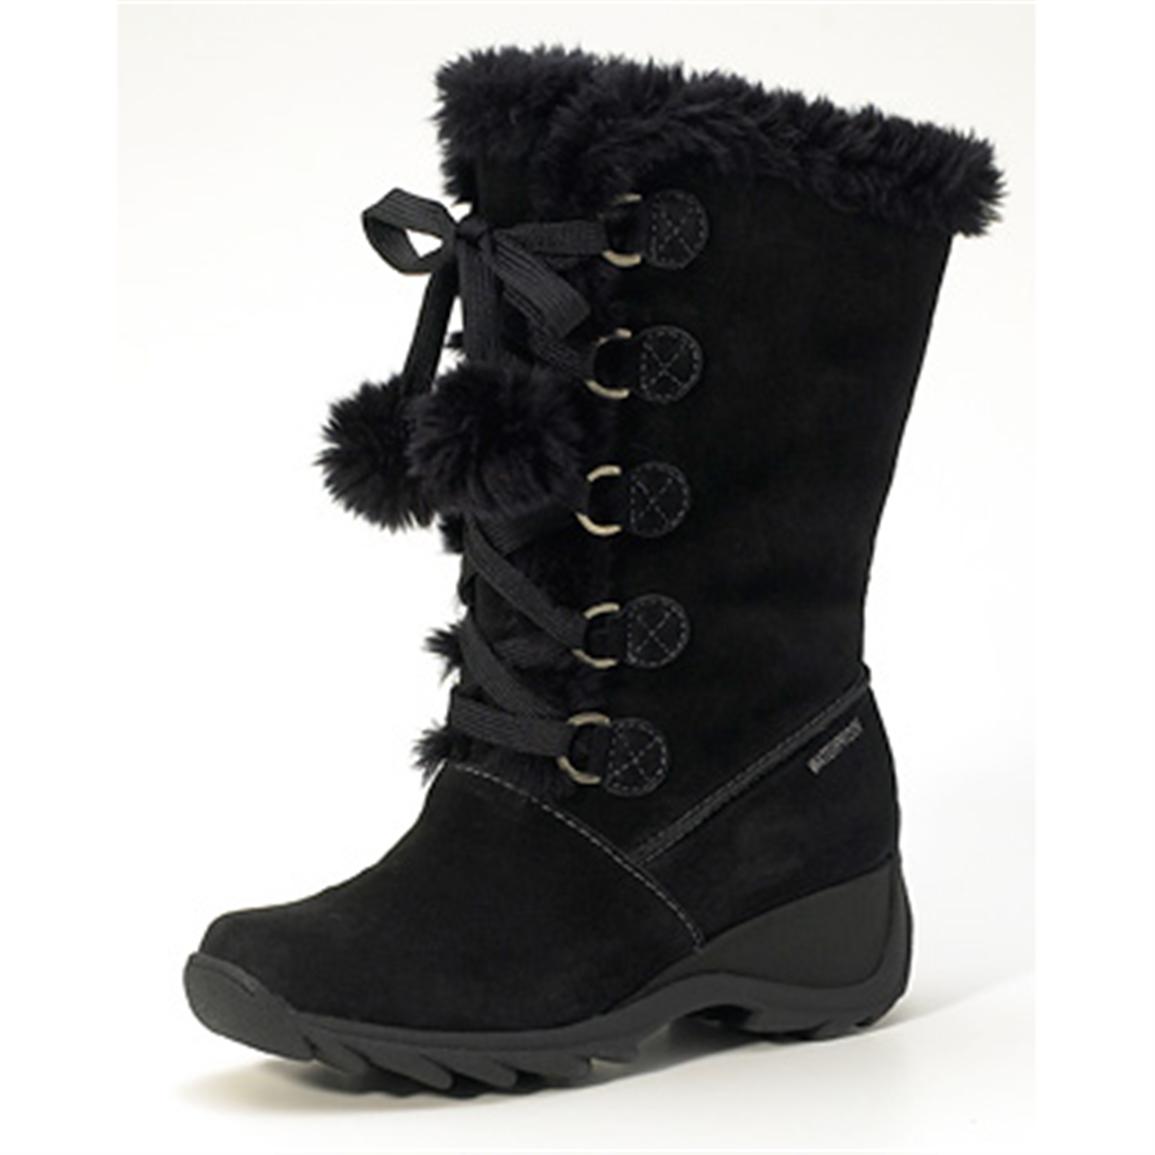 sporto lace up boots